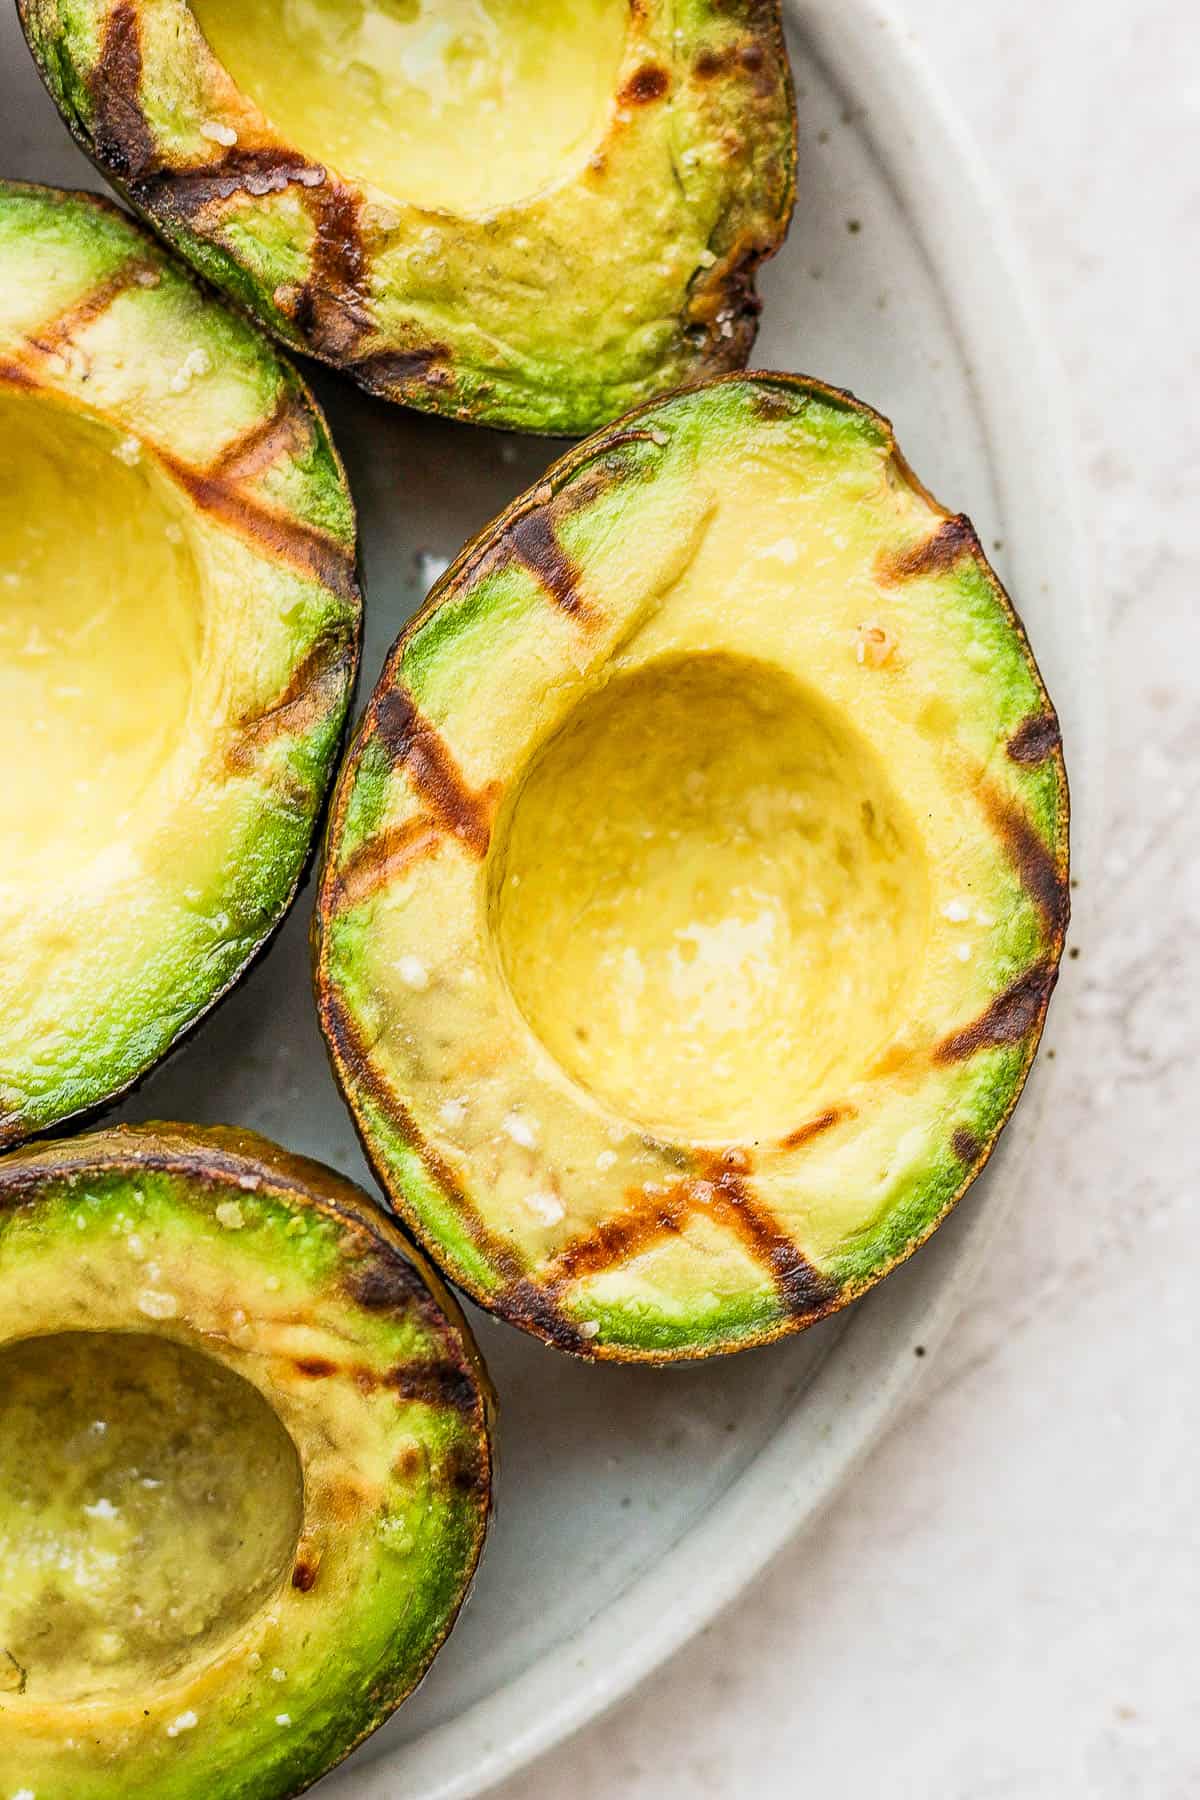 Grilled avocados with grill marks on a plate.